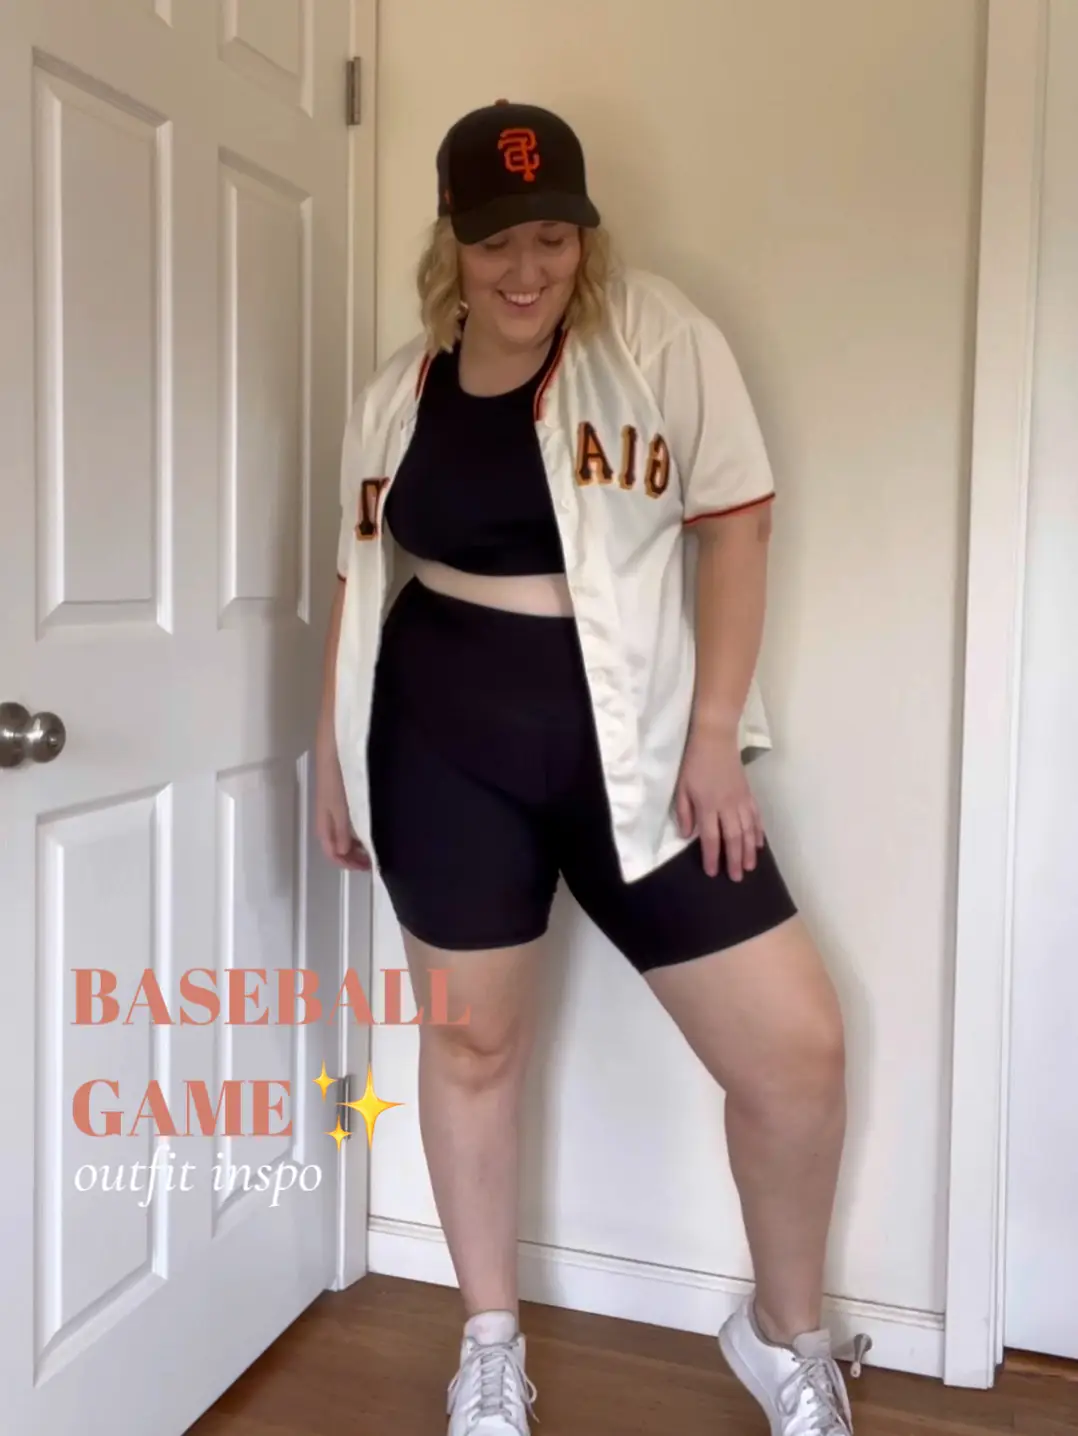 Baseball game outfit idea ⚾️🧡, Video published by Kaitlyn